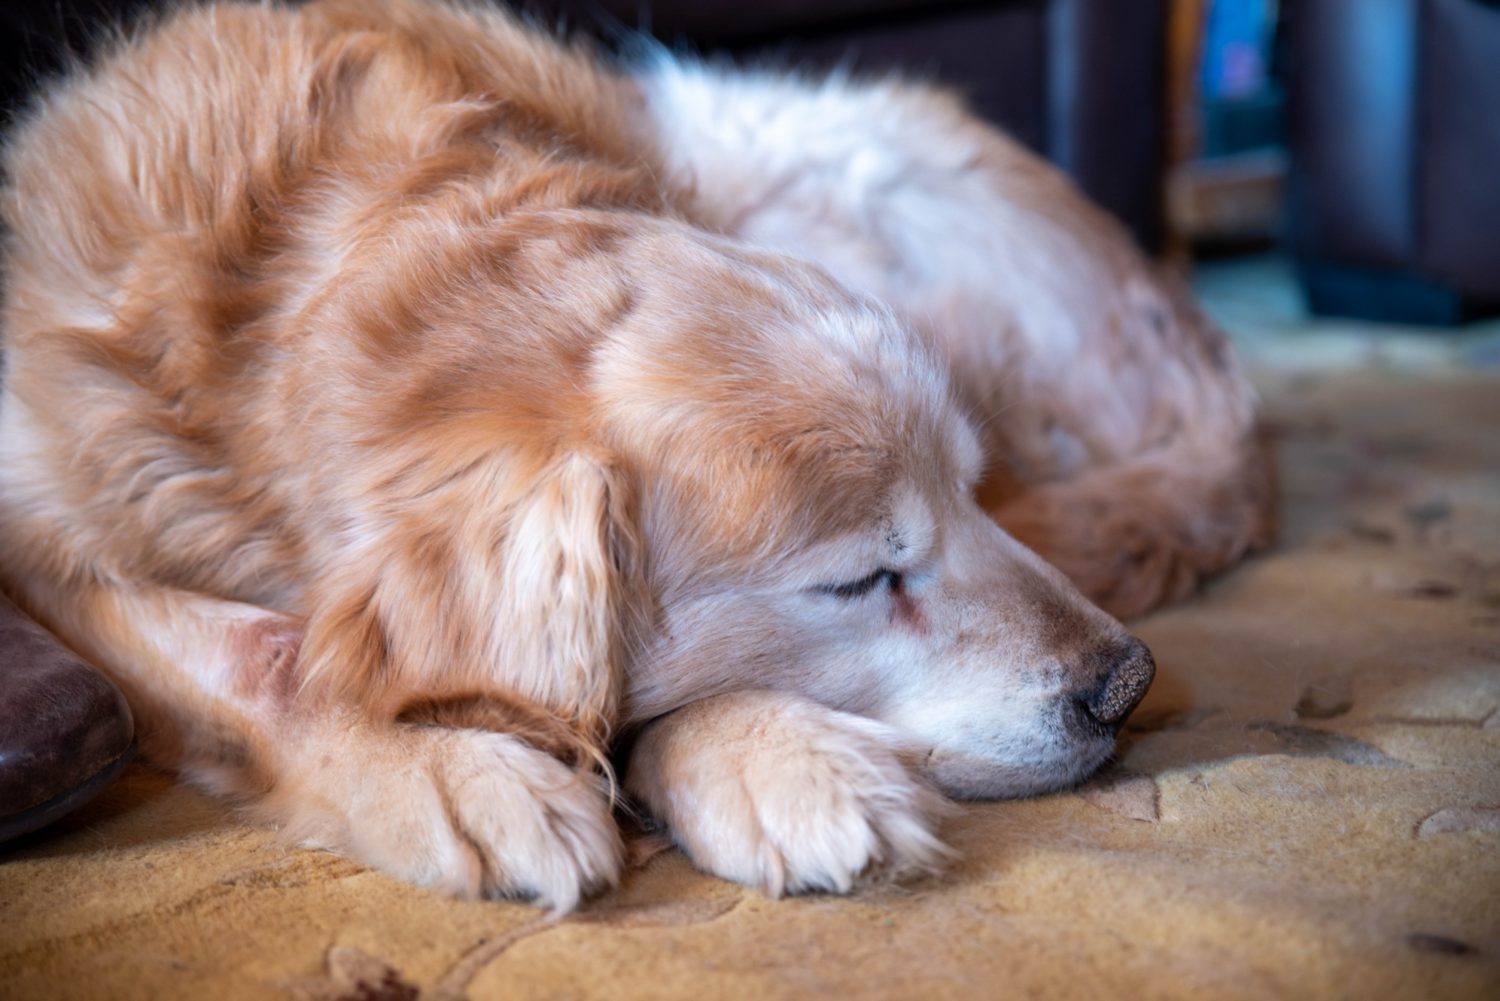 Learn to identify and treat pain in your pet.